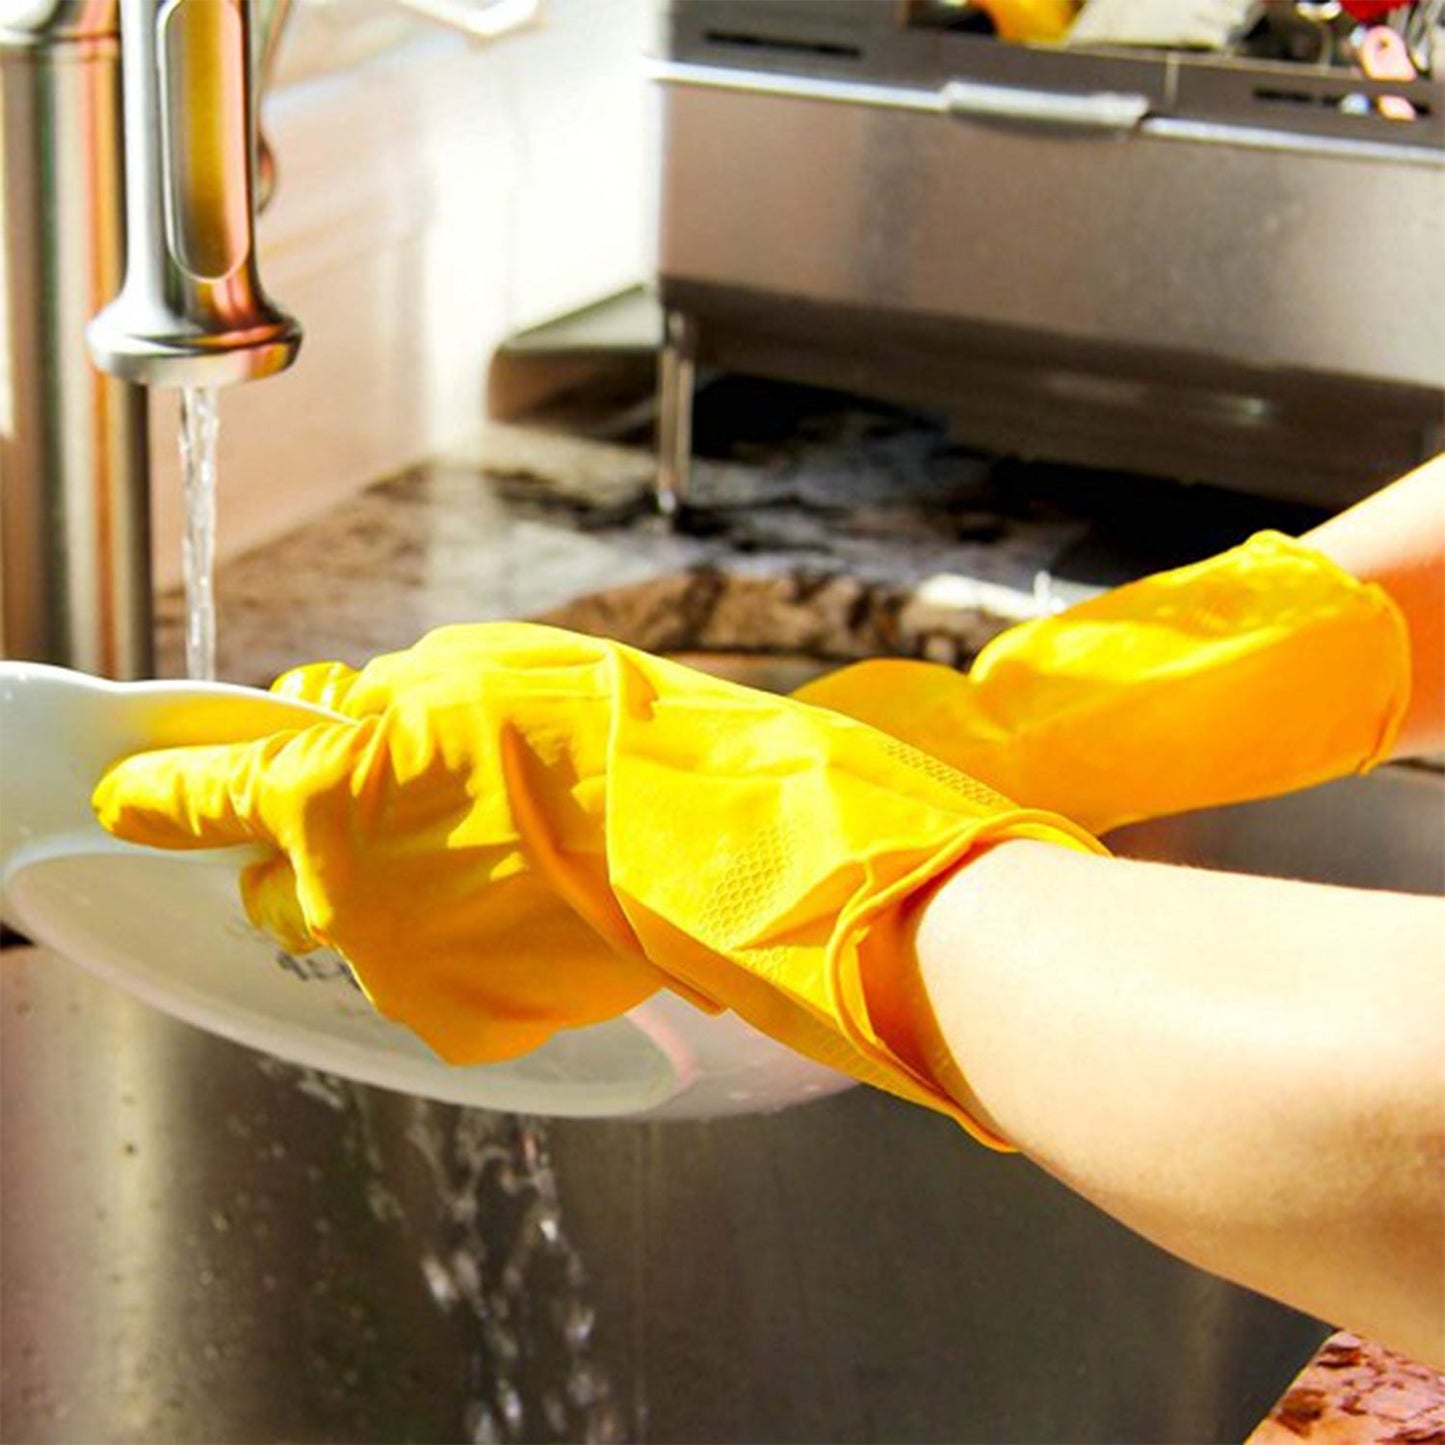 4854 2 pair med yellow gloves For Types Of Purposes Like Washing Utensils, Gardening And Cleaning Toilet Etc.